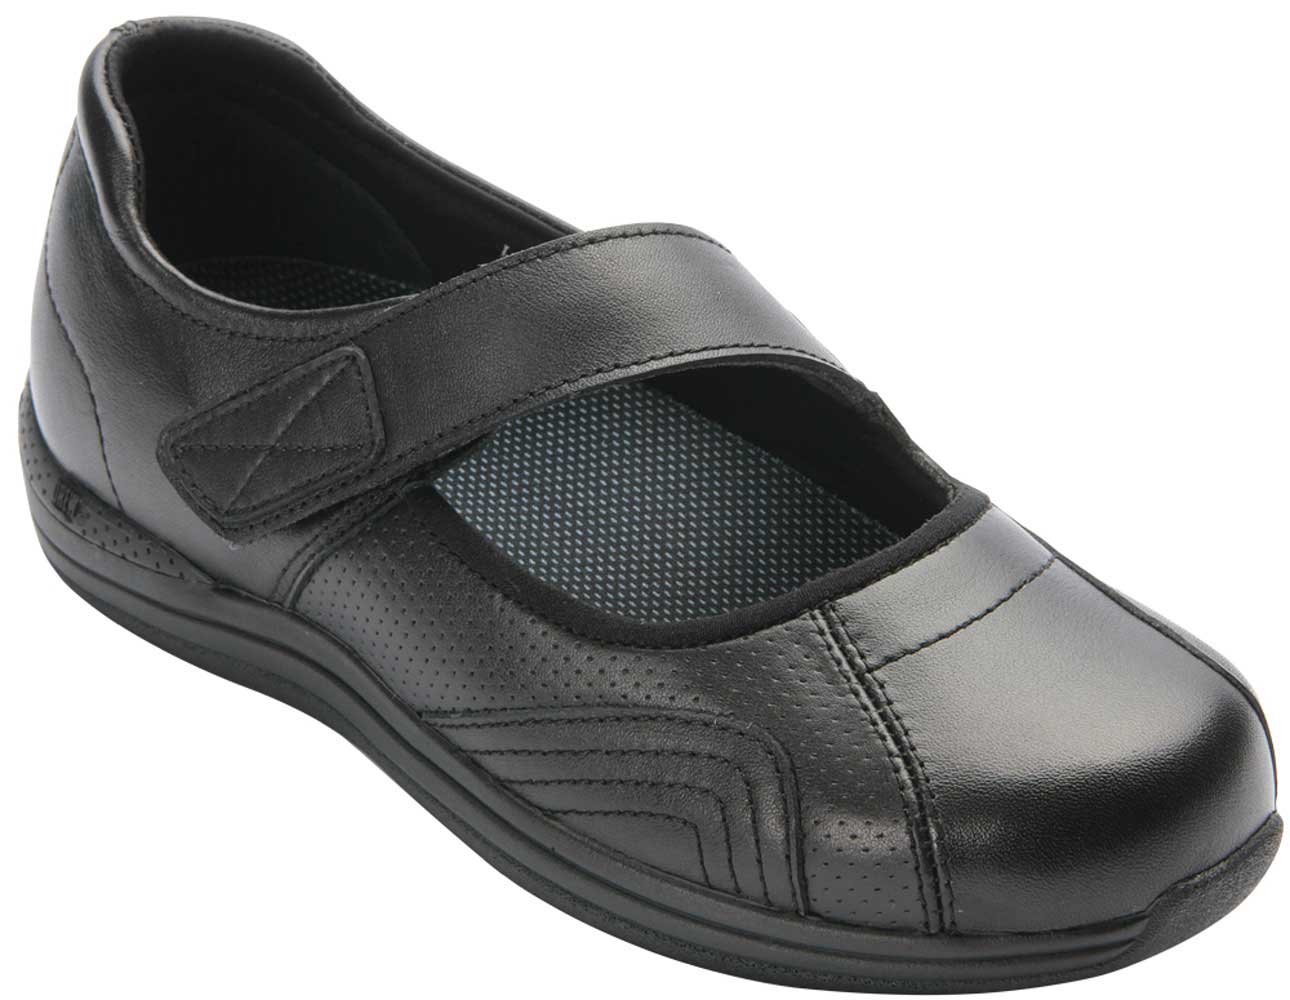 Drew Shoes Heather 14400 - Women's Casual Comfort Therapeutic Diabetic Shoe - Extra Depth For Orthotics